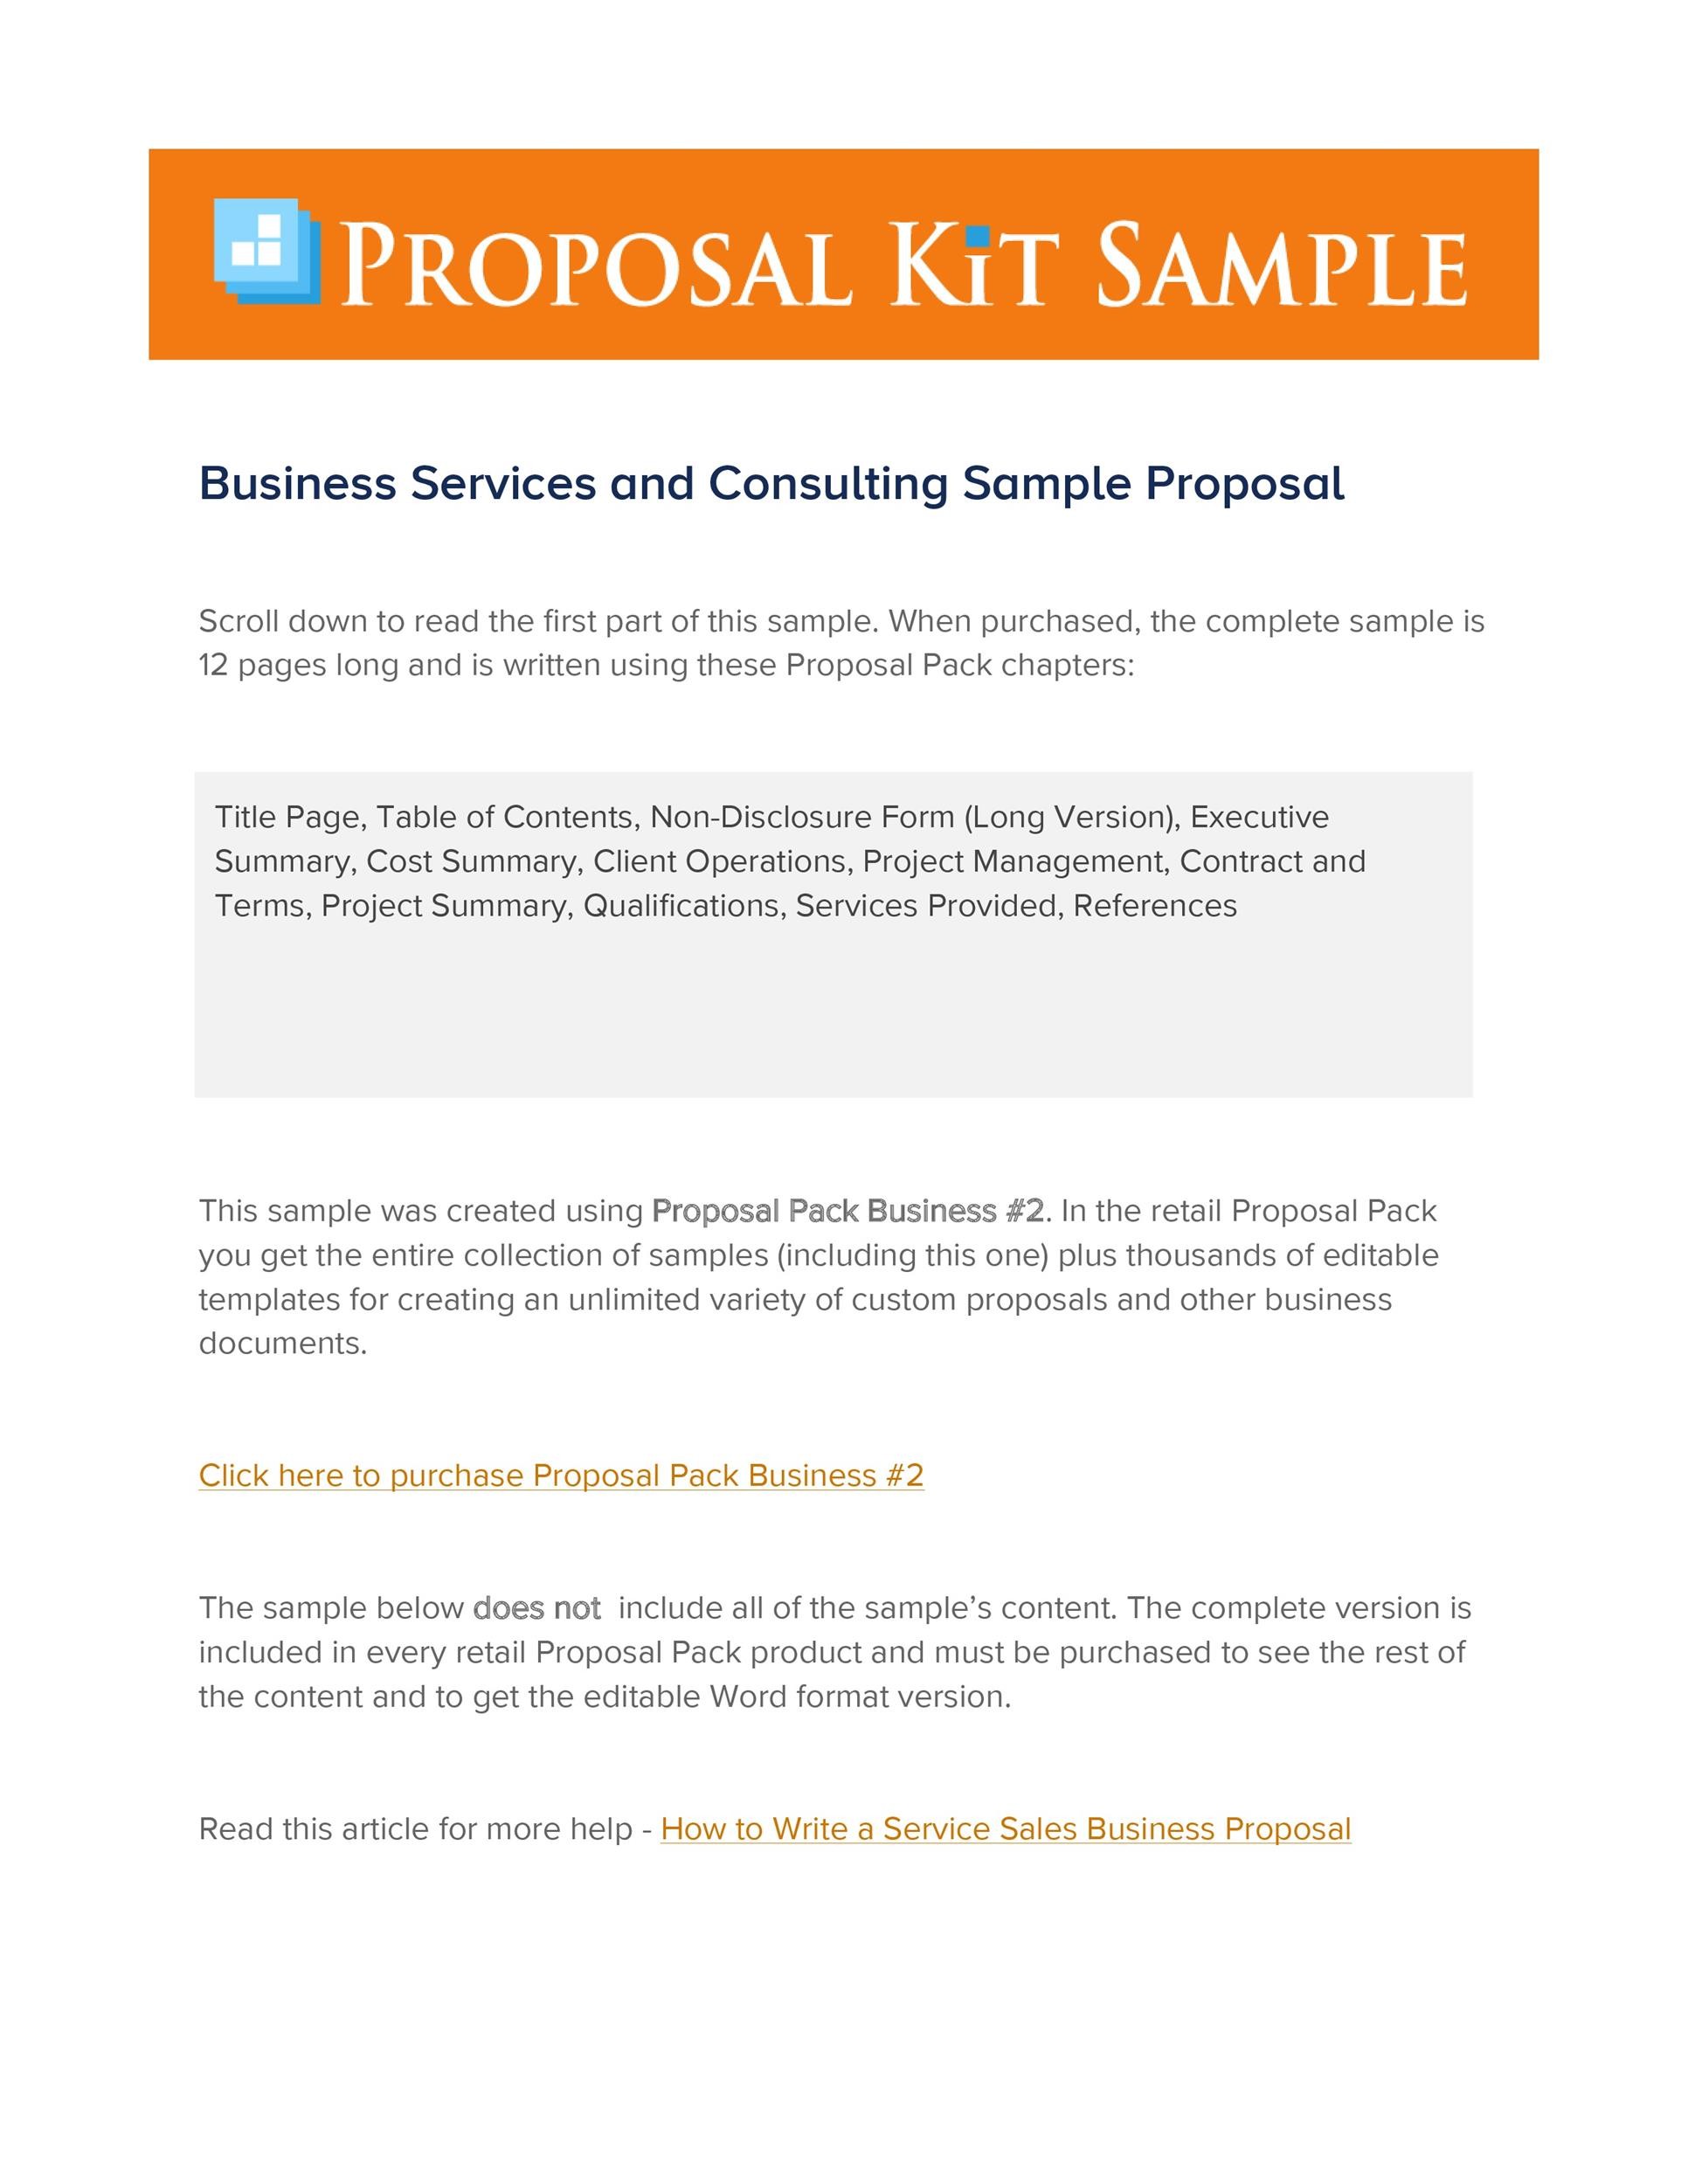 39 BEST Consulting Proposal Templates FREE ᐅ TemplateLab